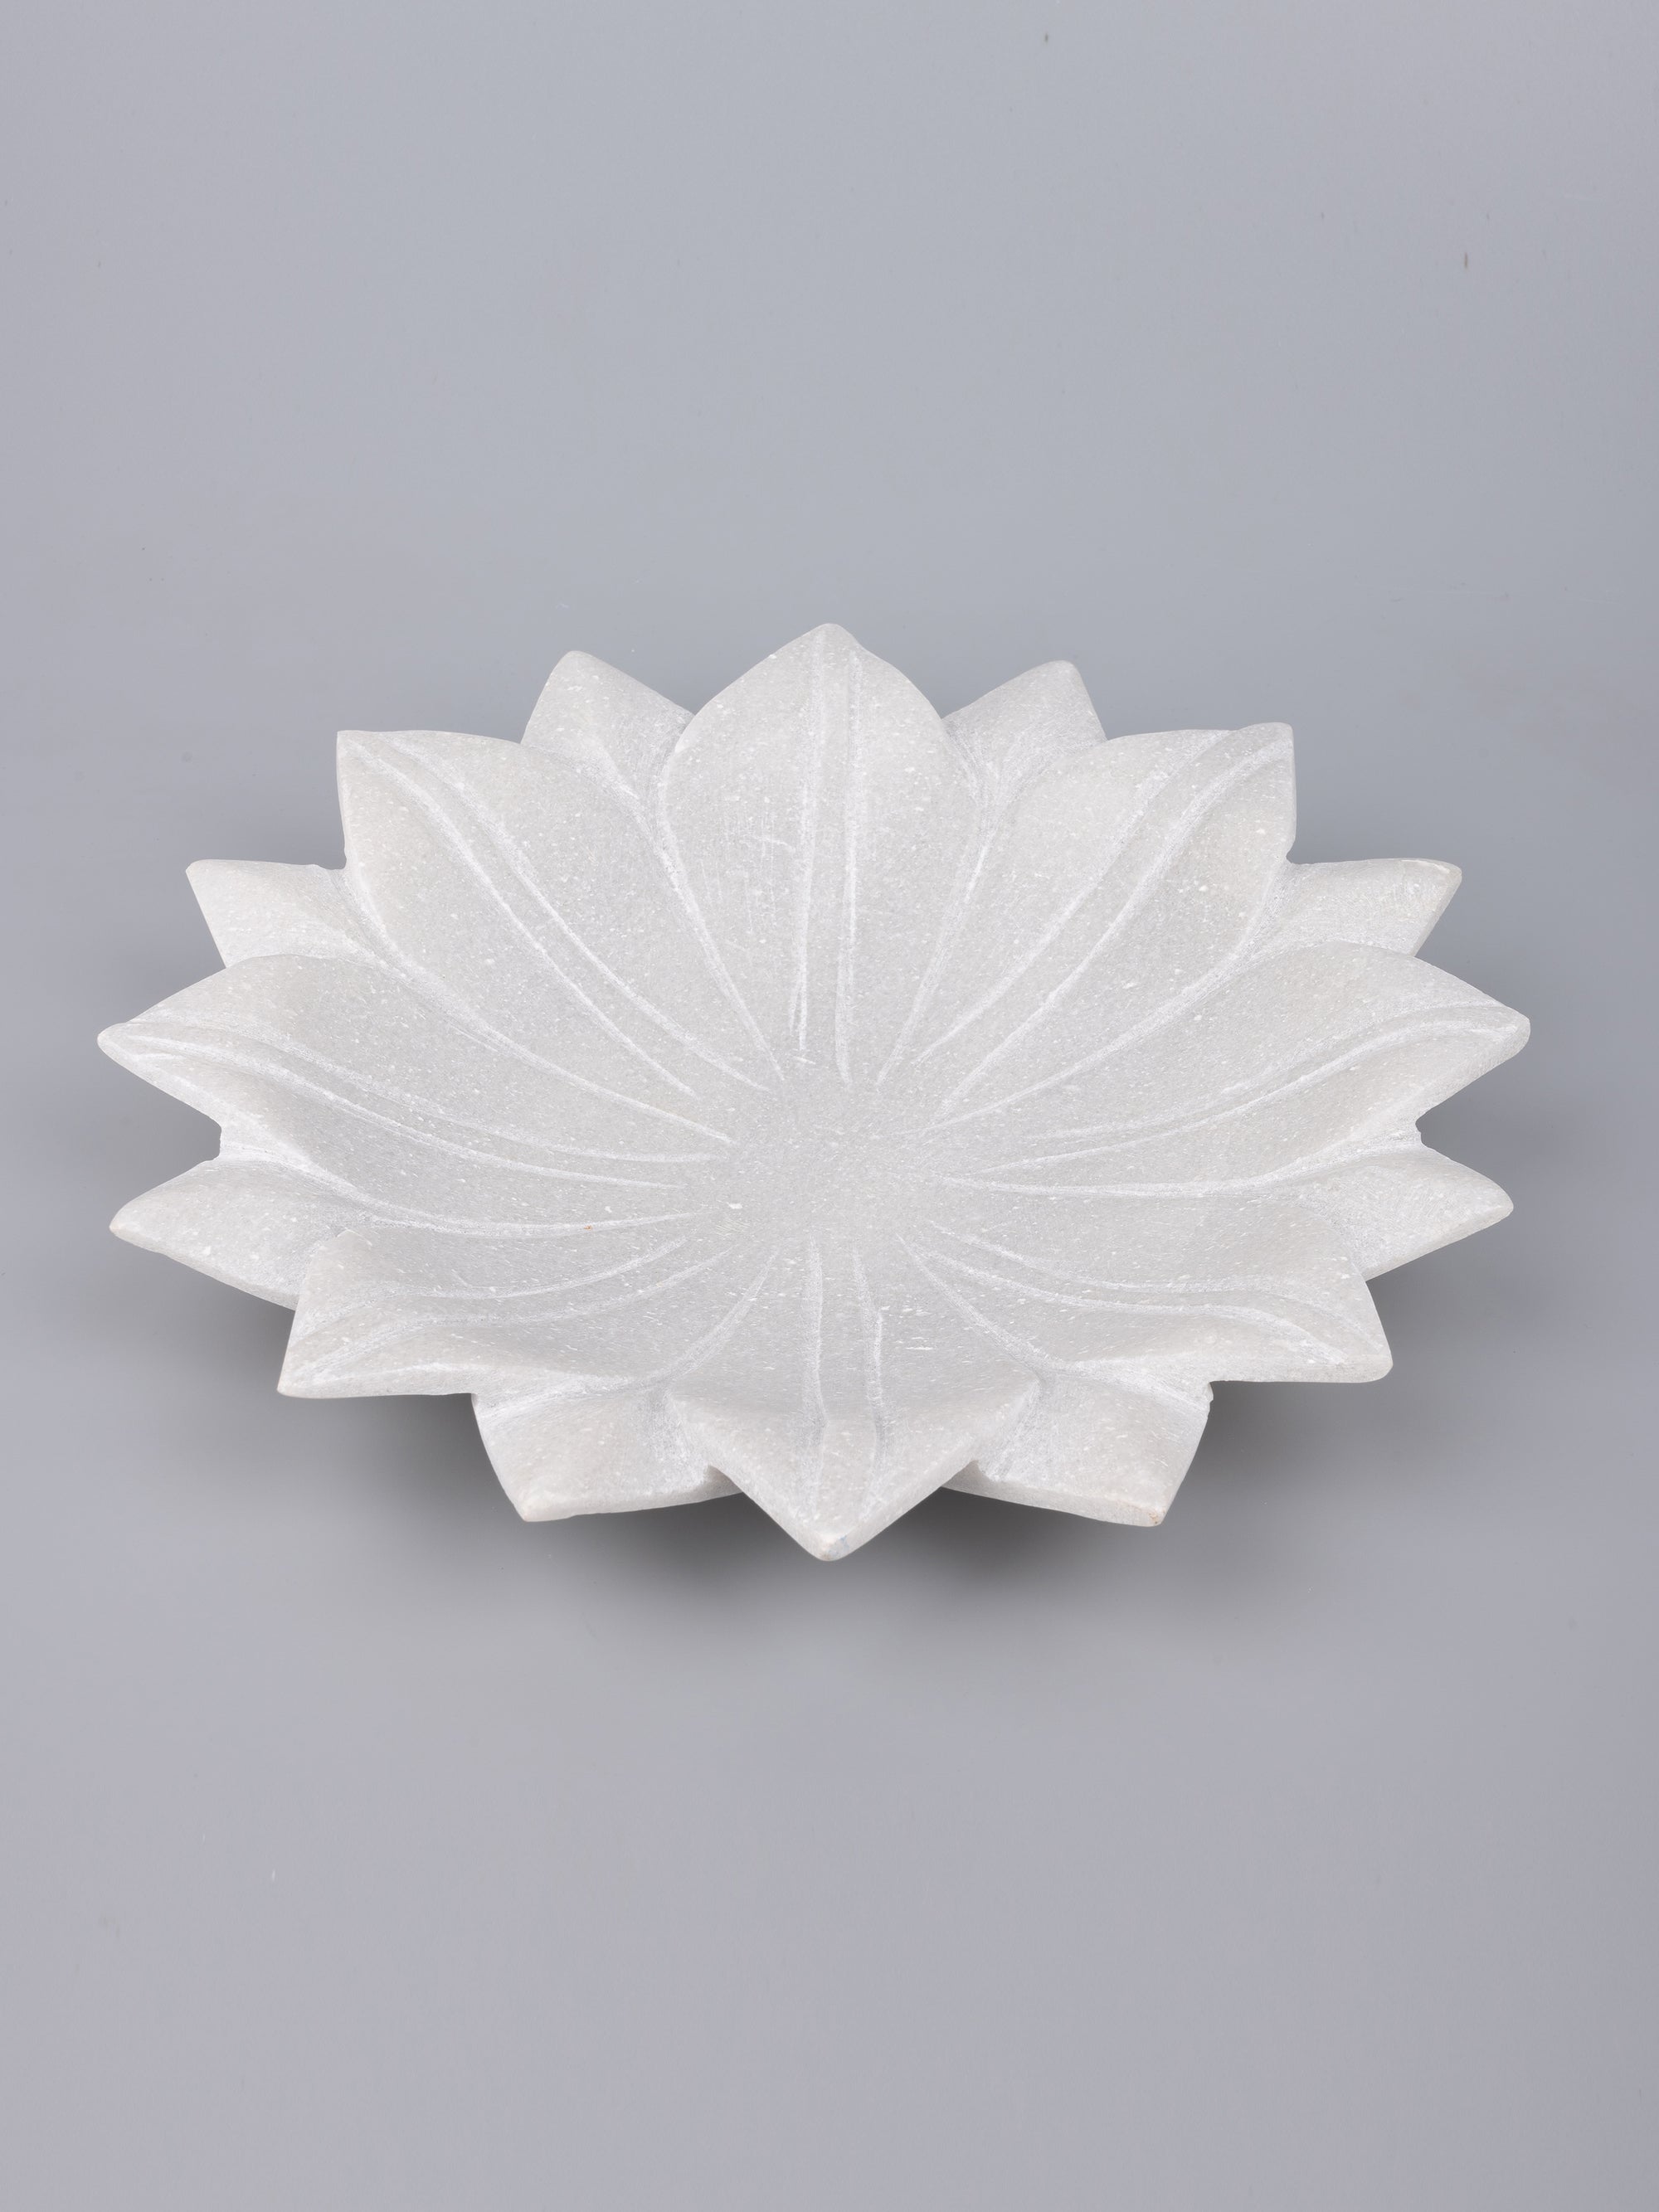 Lotus Urli bowl / plate made of pure white marble - 5 inches - The Heritage Artifacts